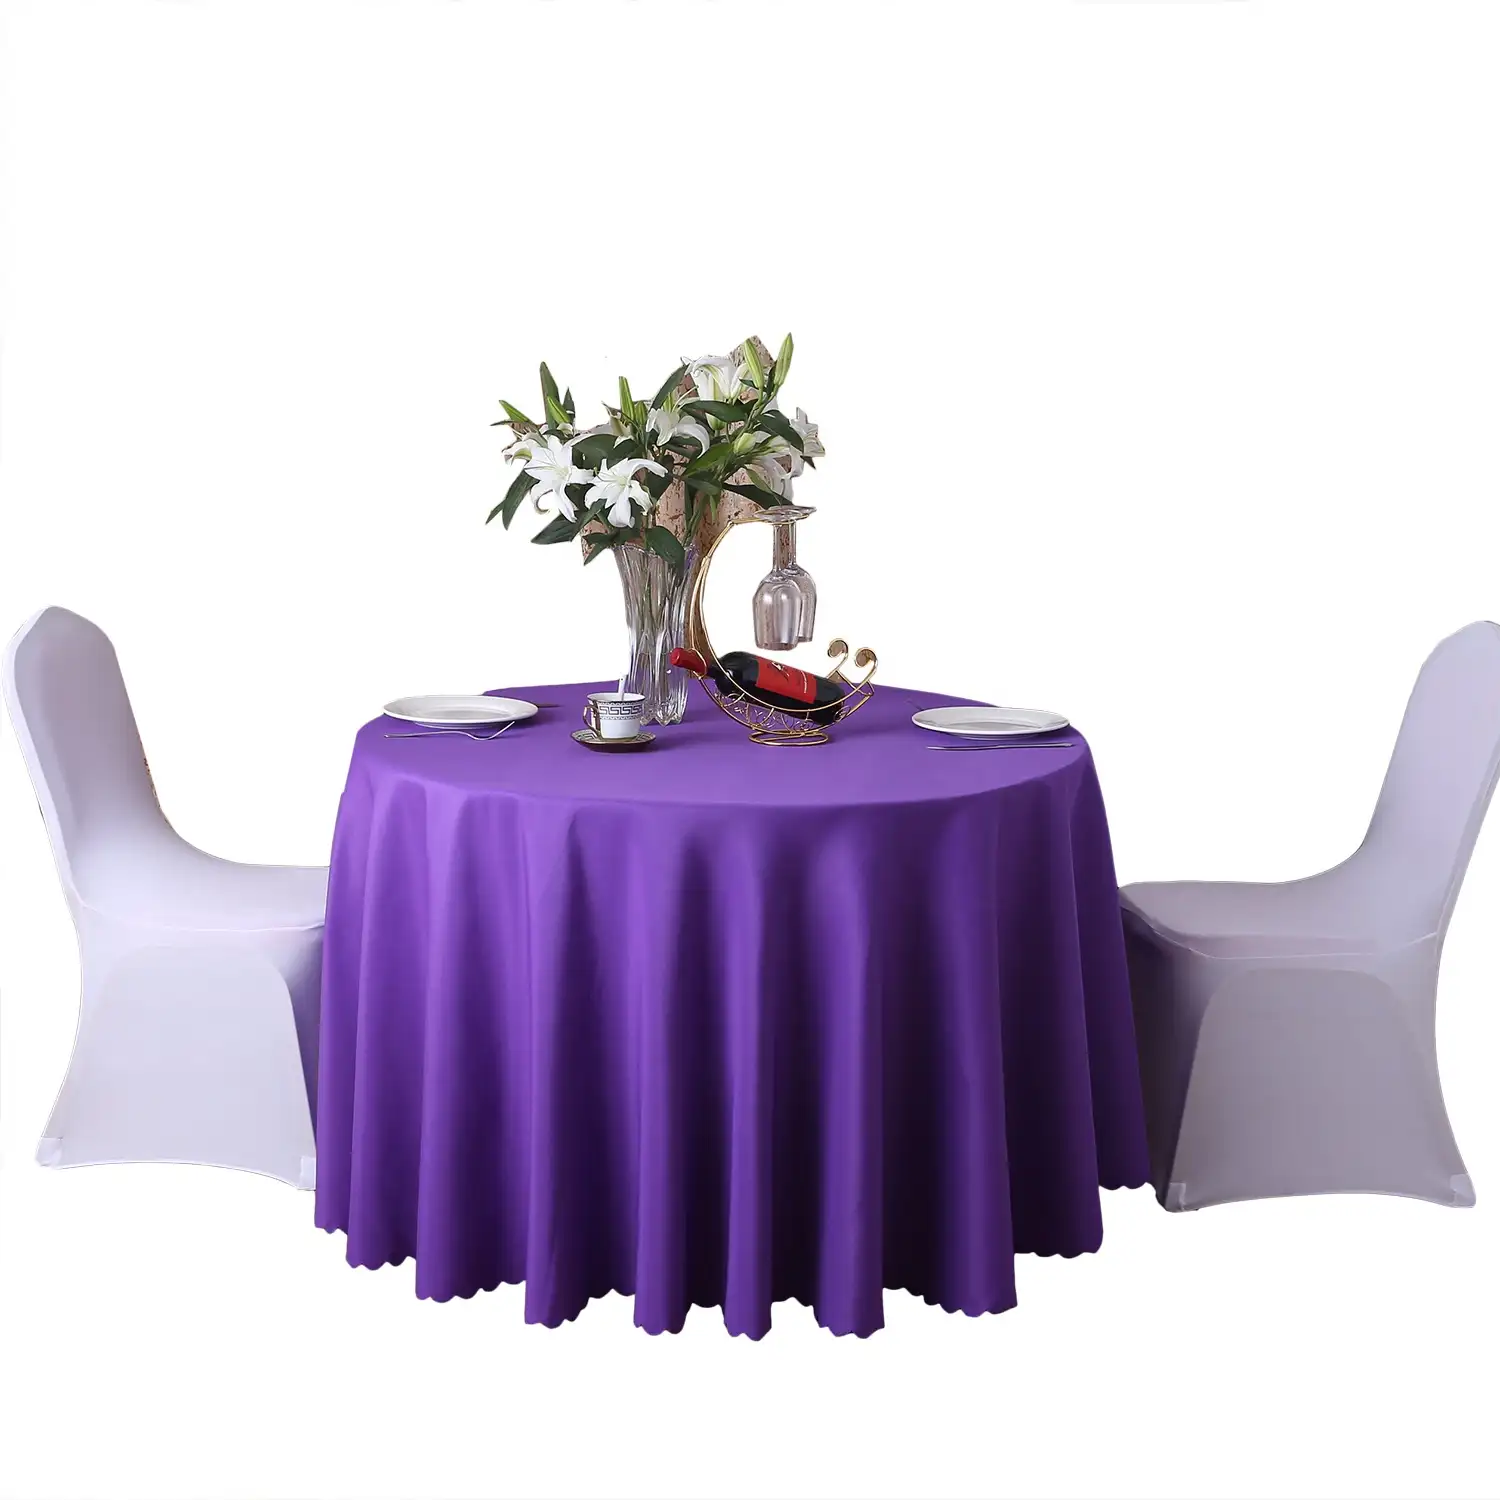 Table Cover Chair Covers Wedding Decoration Wedding Table Decorations Chair And Table Cover For Hotels